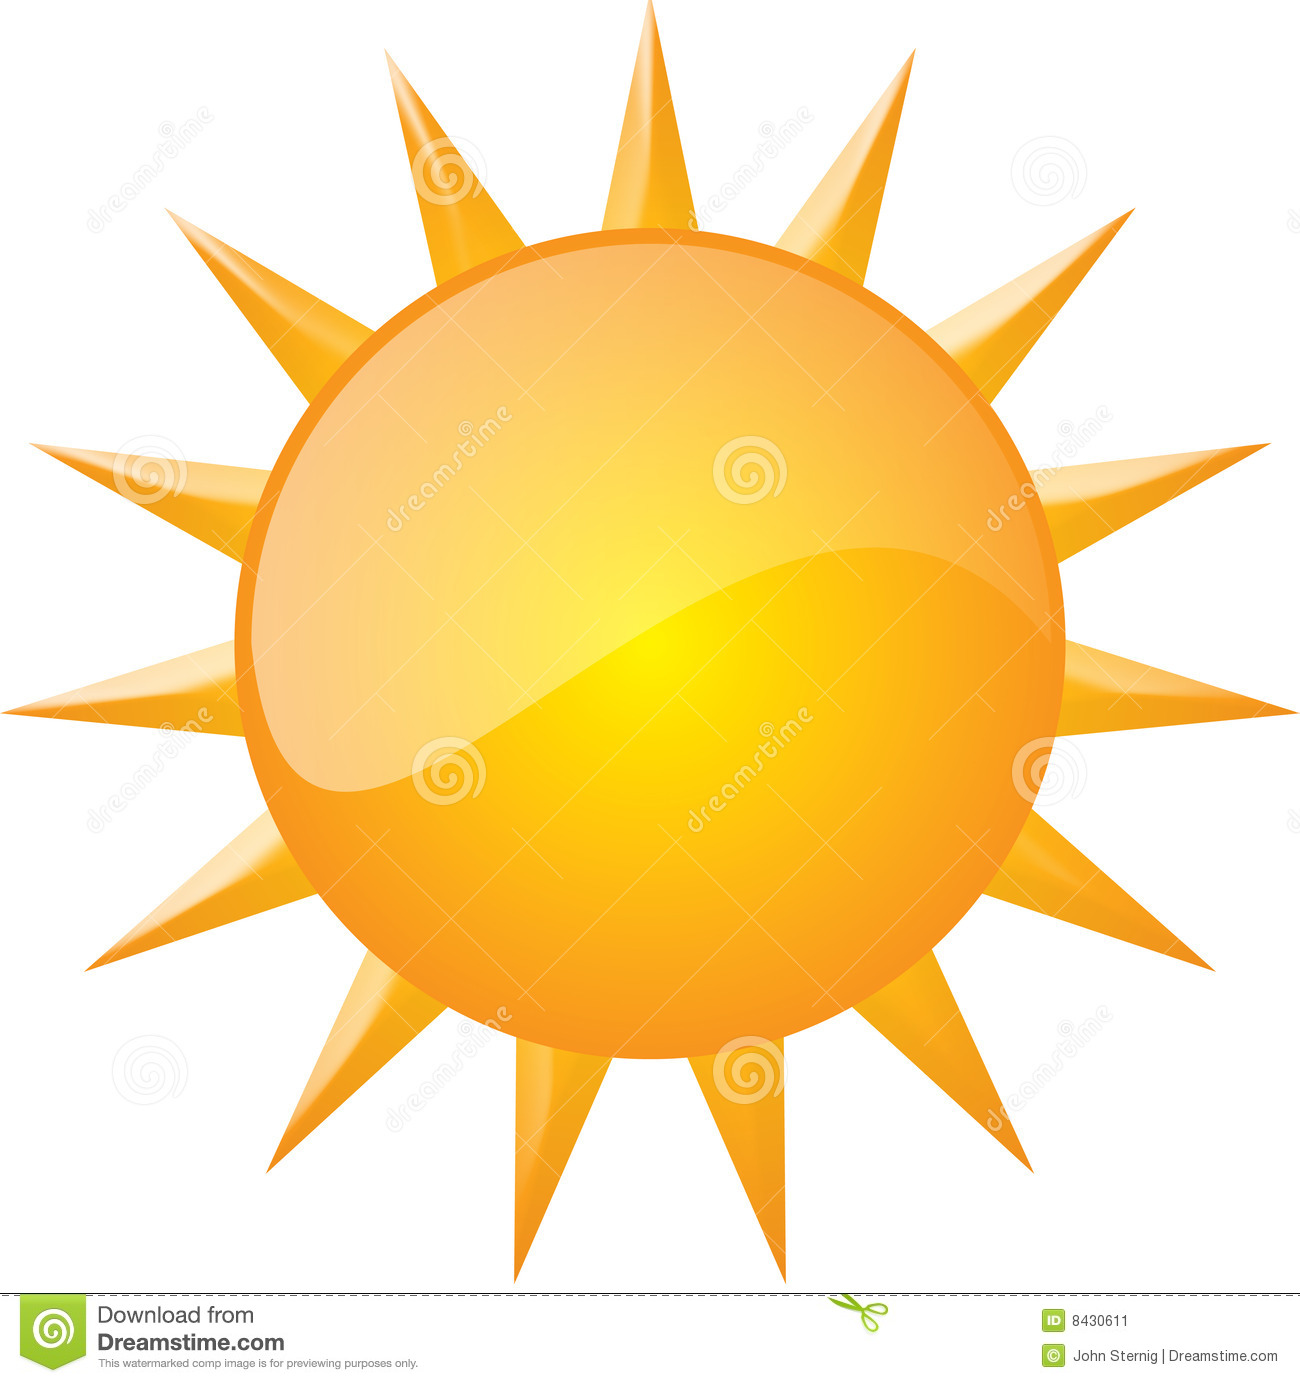 Graphic Of Sun  Vector Available  Stock Image   Image  8430611